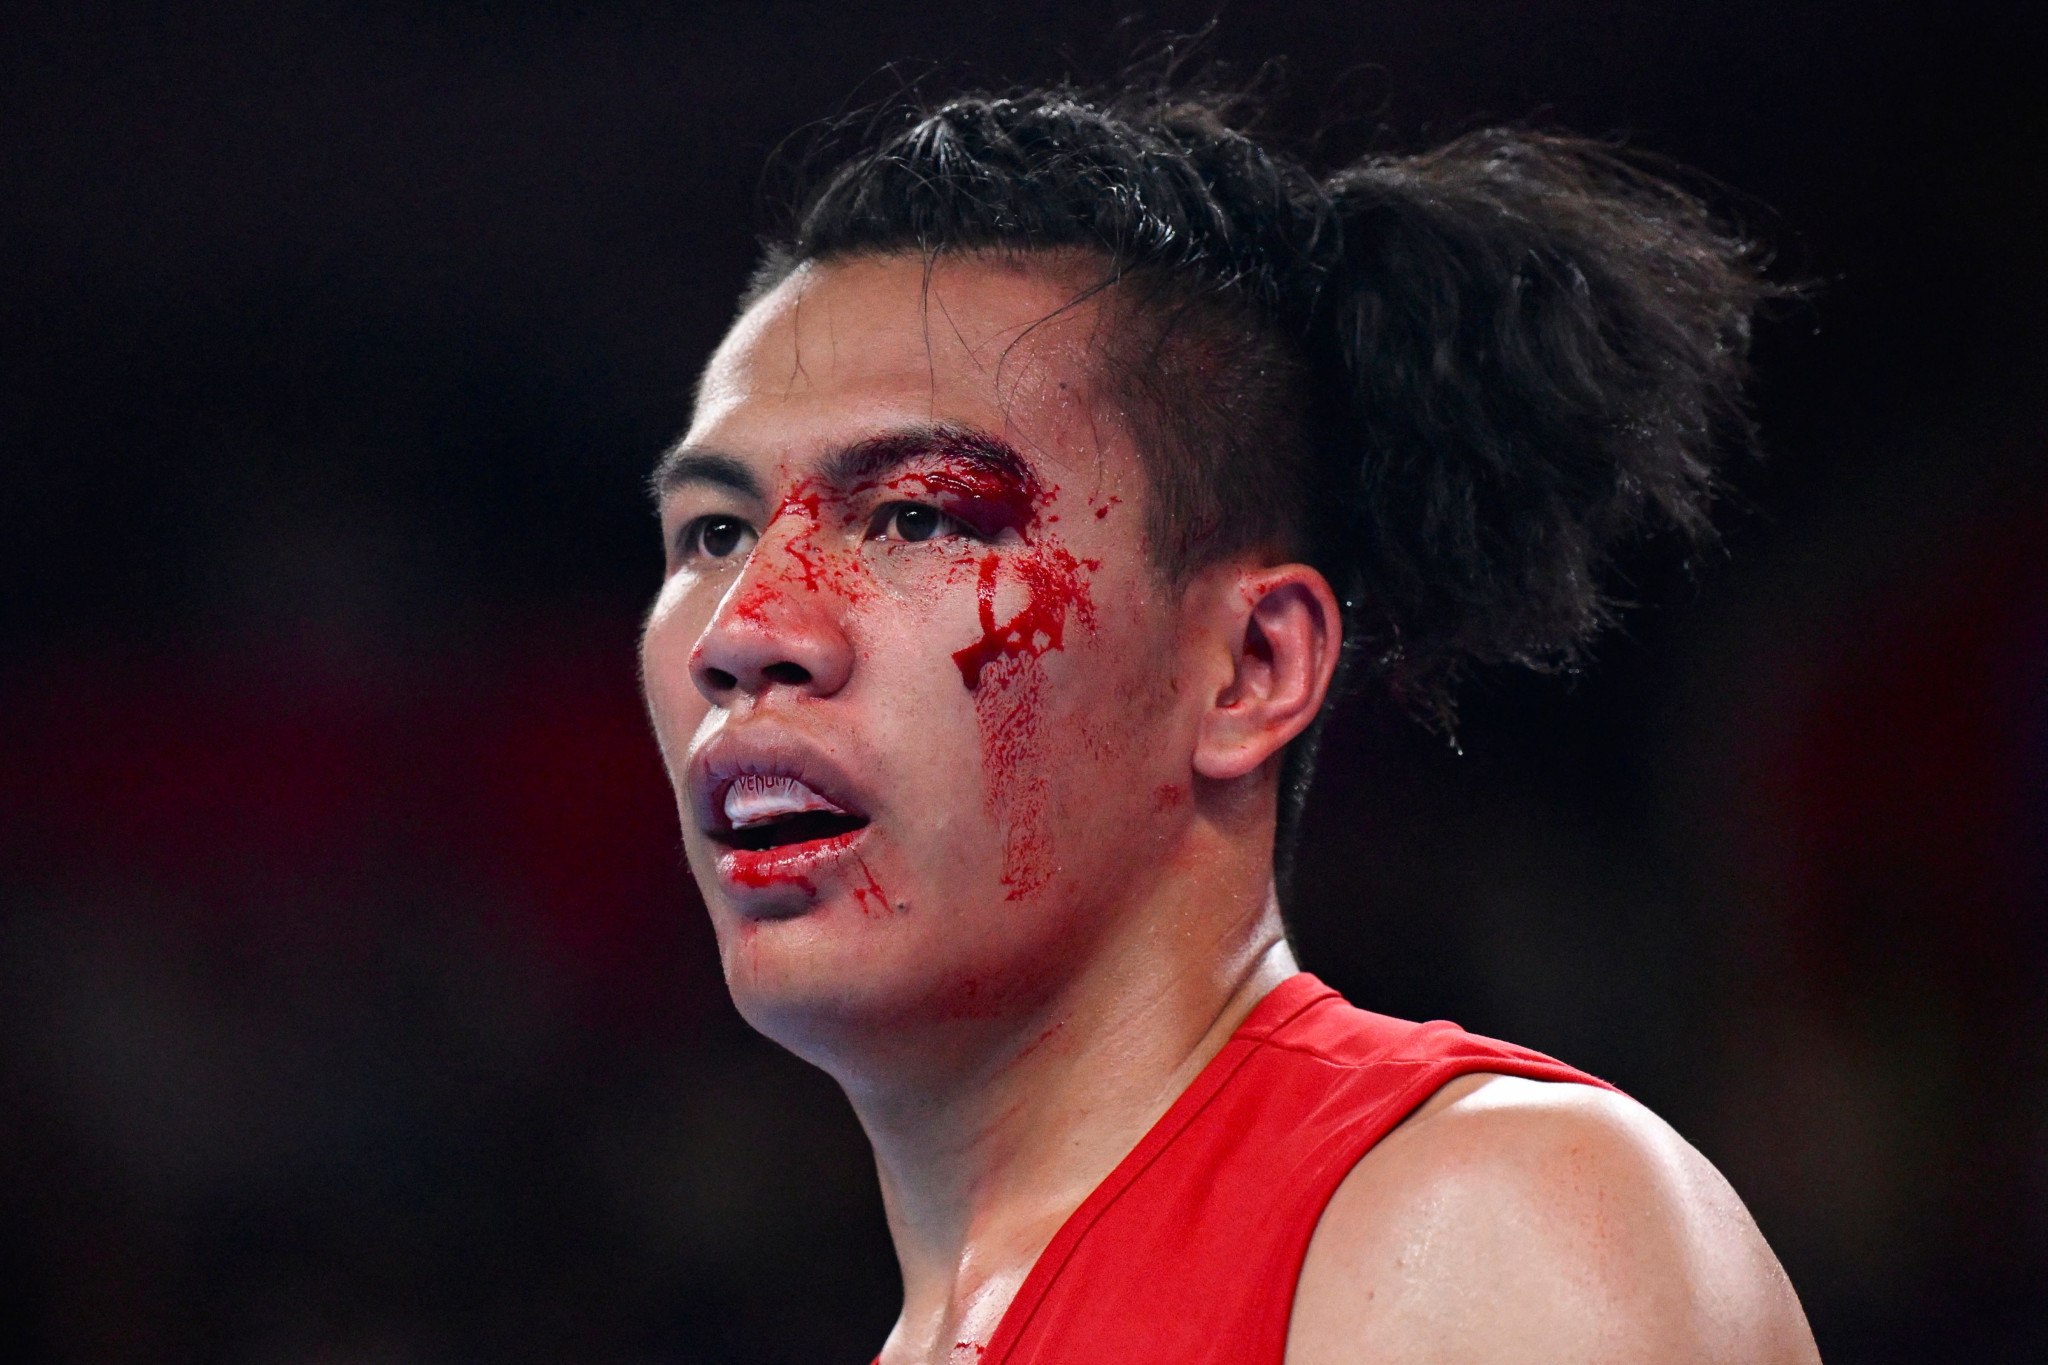 Boxer forced to concede gold medal fight due to facial injury at Hangzhou 2022